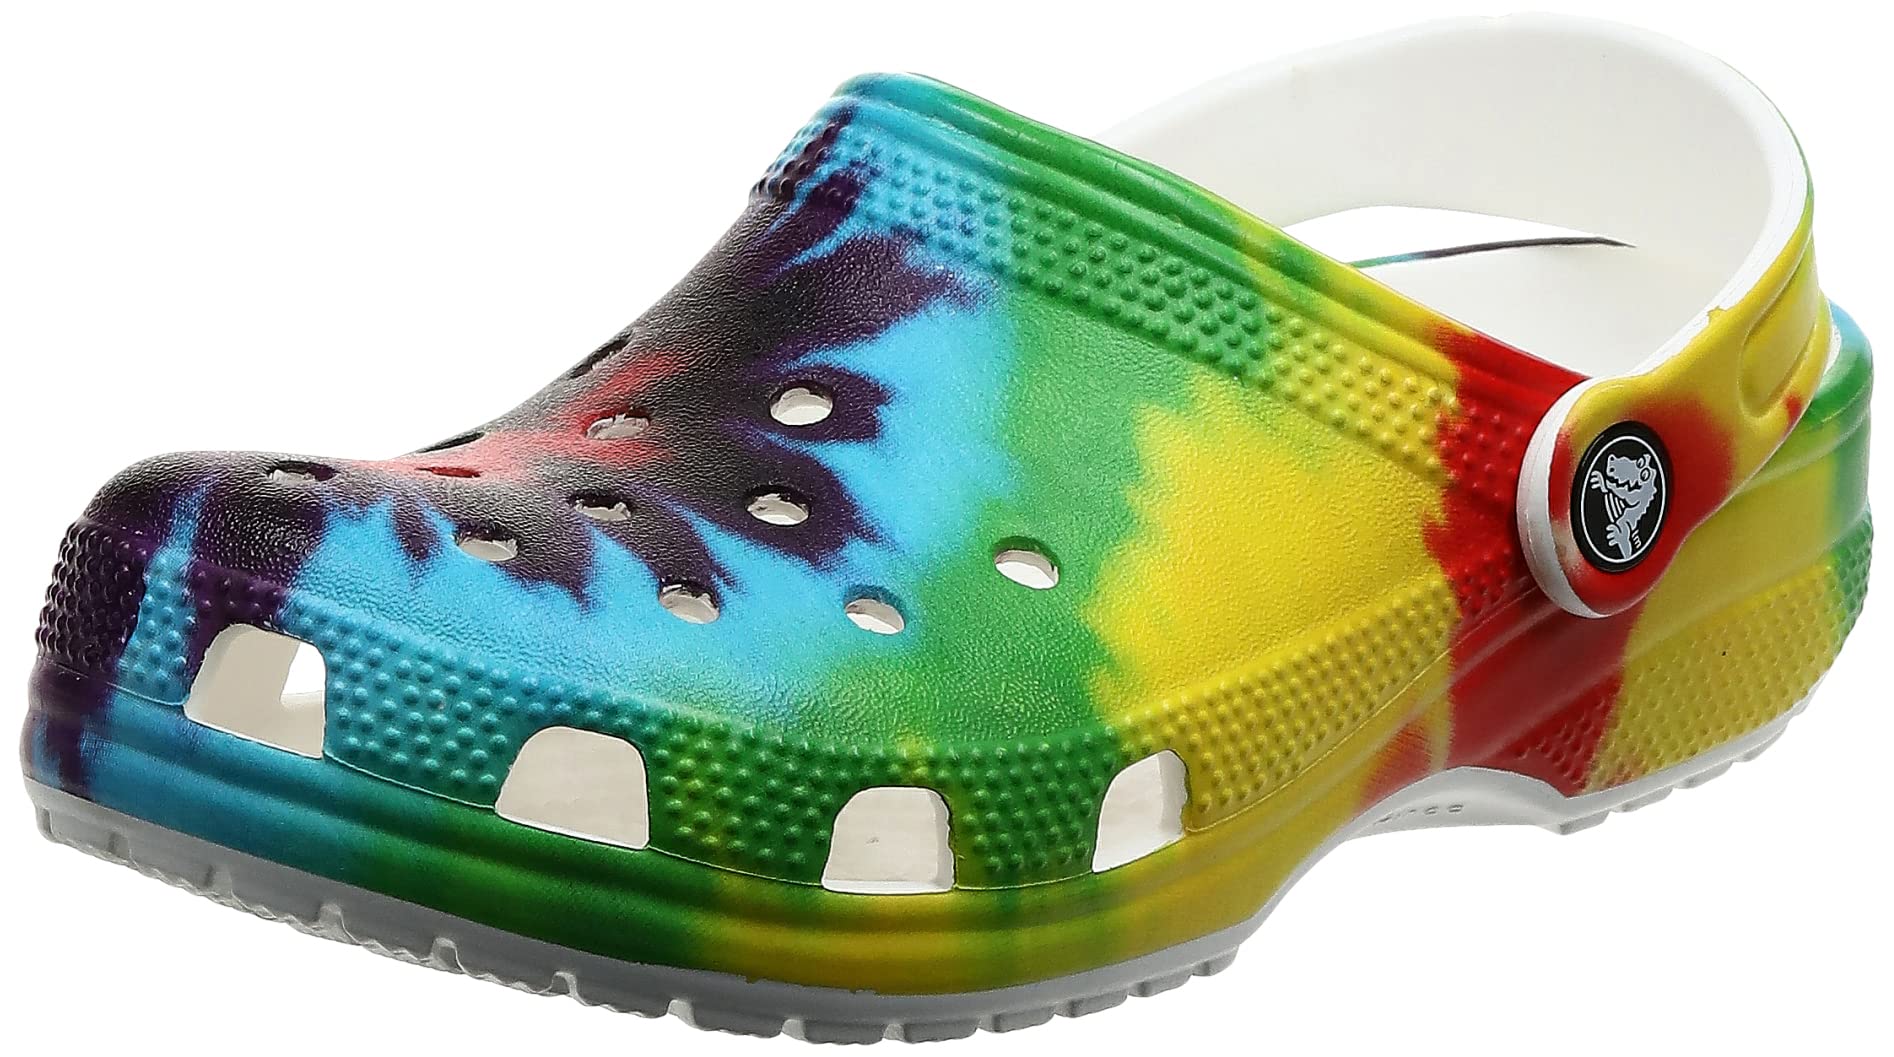 Crocs Men's or Women's Classic Tie Dye Clog $20 + Free Shipping w/ Prime or on orders over $25